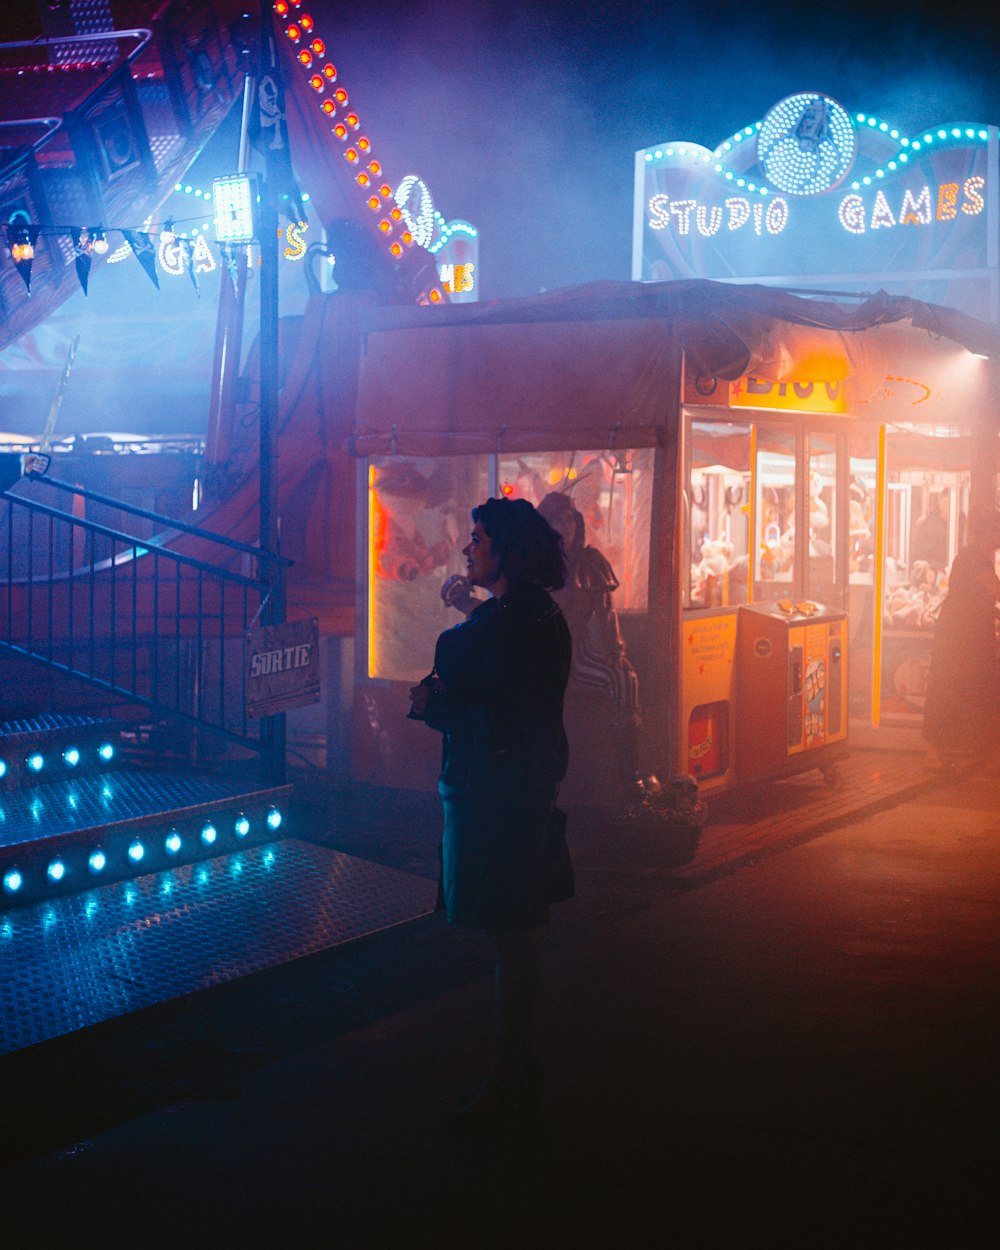 a woman standing in front of a carnival booth at night